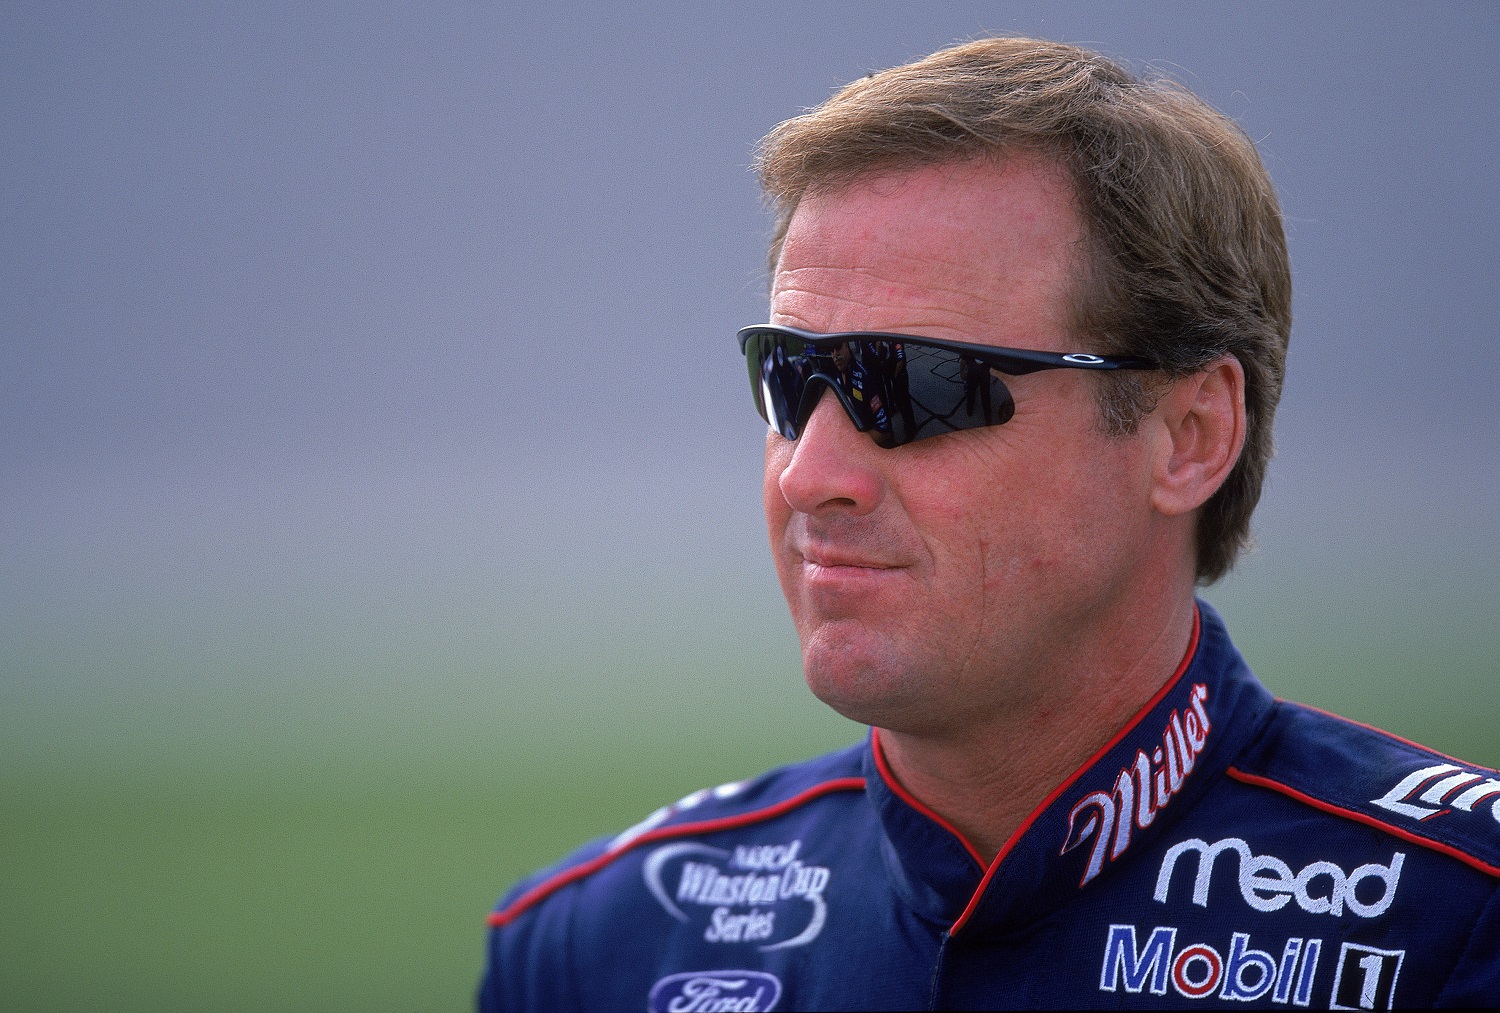 Rusty Wallace looks on during the Talladega 500, part of the NASCAR Winston Cup Series at the Talladega Super Speedway on April 20, 2001.